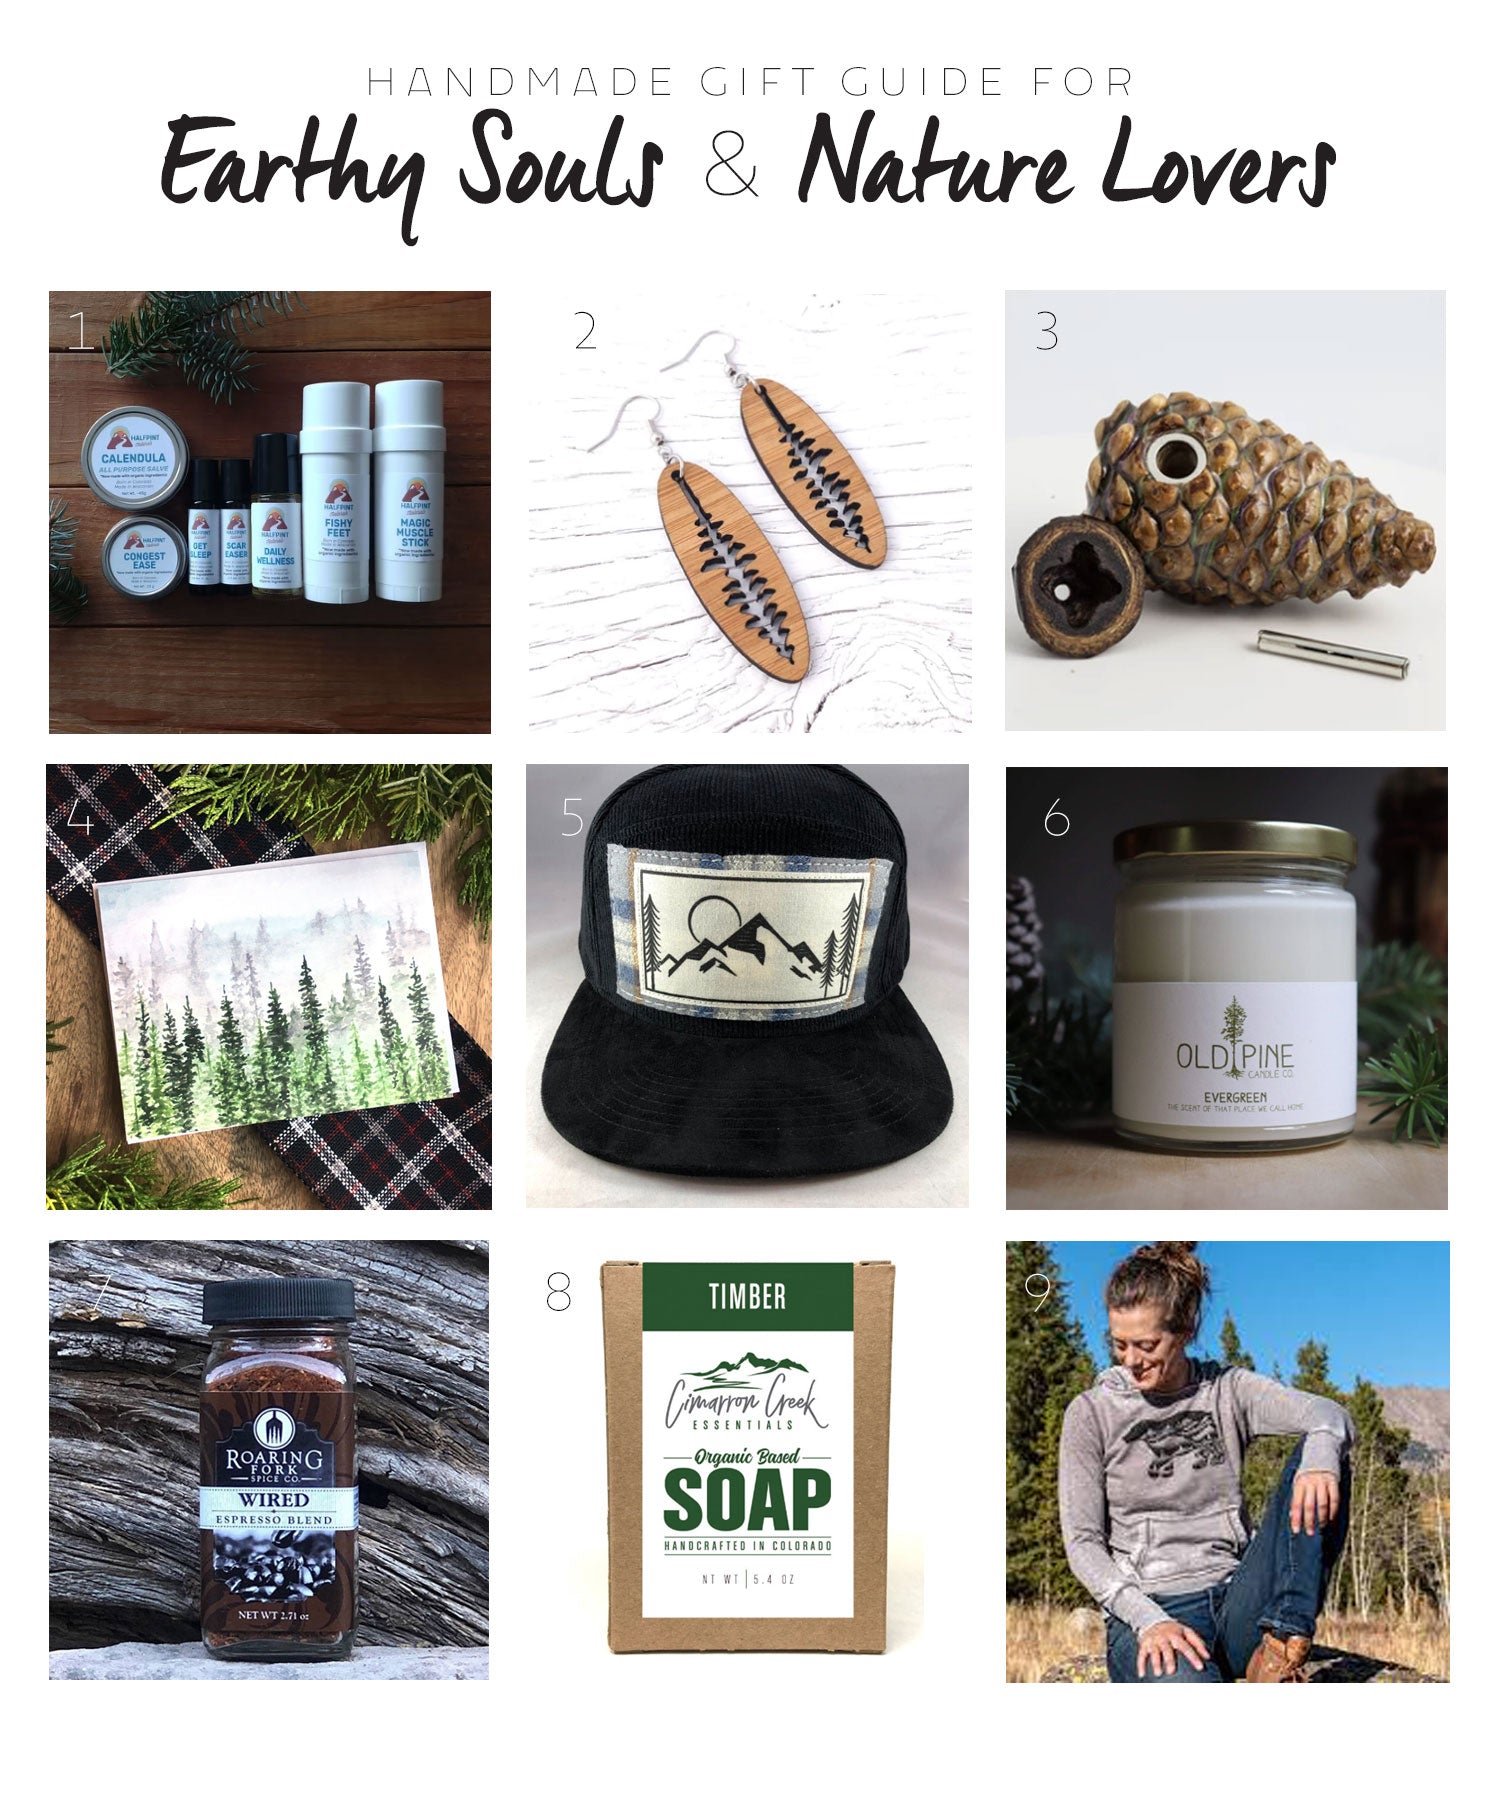 handmade gift guide for nature lovers and earthy souls